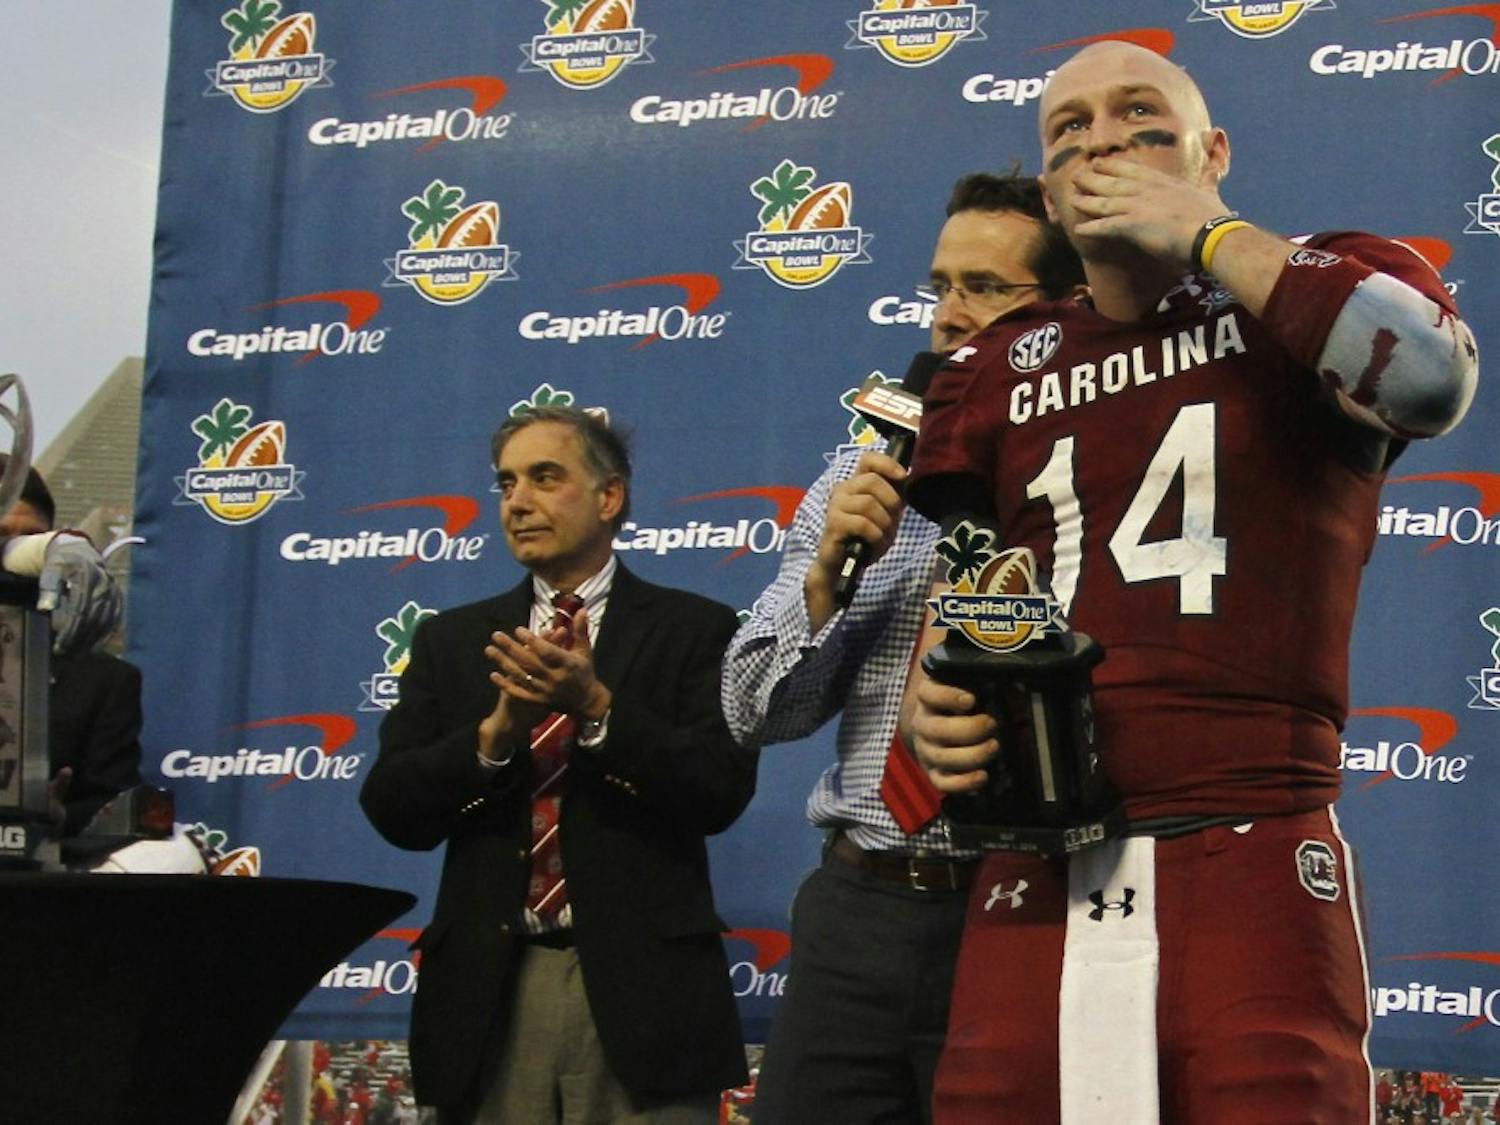 	Senior quarterback Connor Shaw is named most valuable player at the Capital One Bowl on Jan. 1.